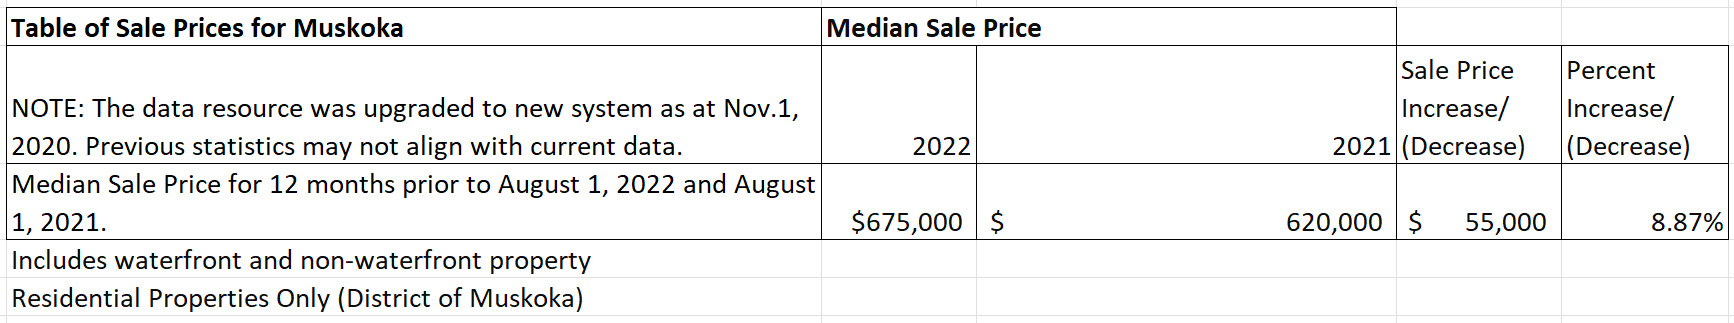 August 2022 Sale Prices